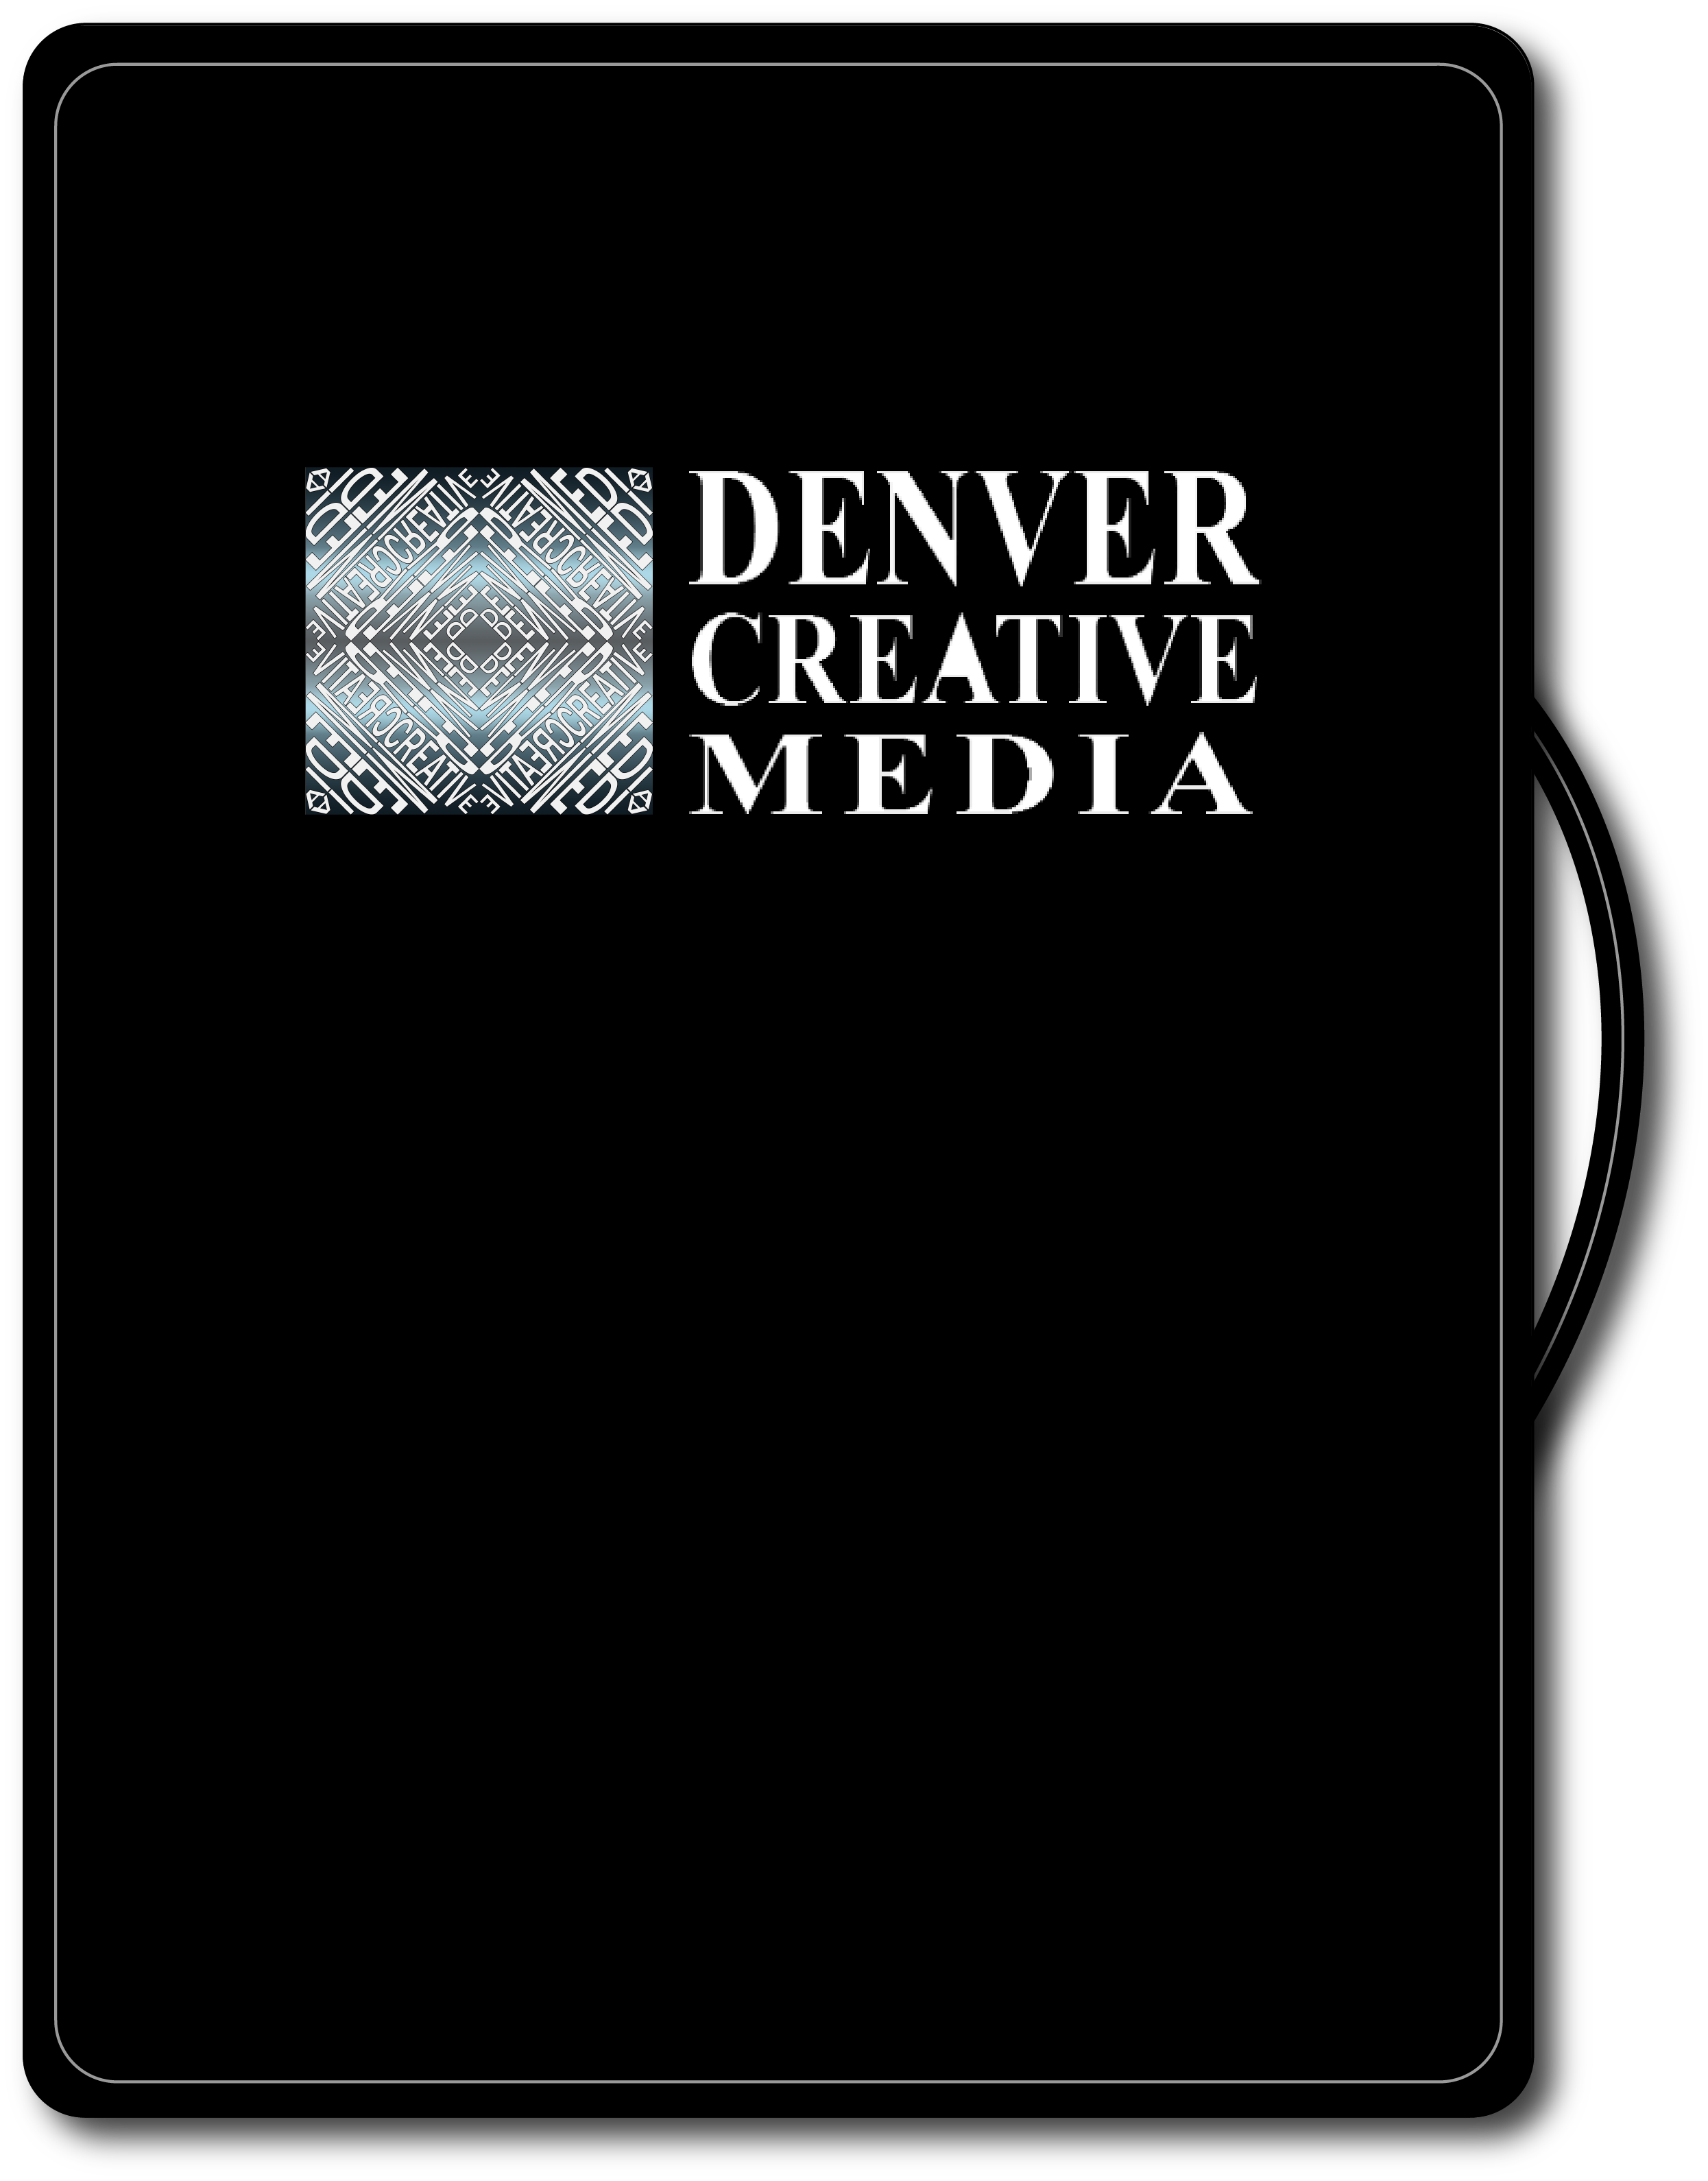 Denver Creative Media The Creative Department For Your Business